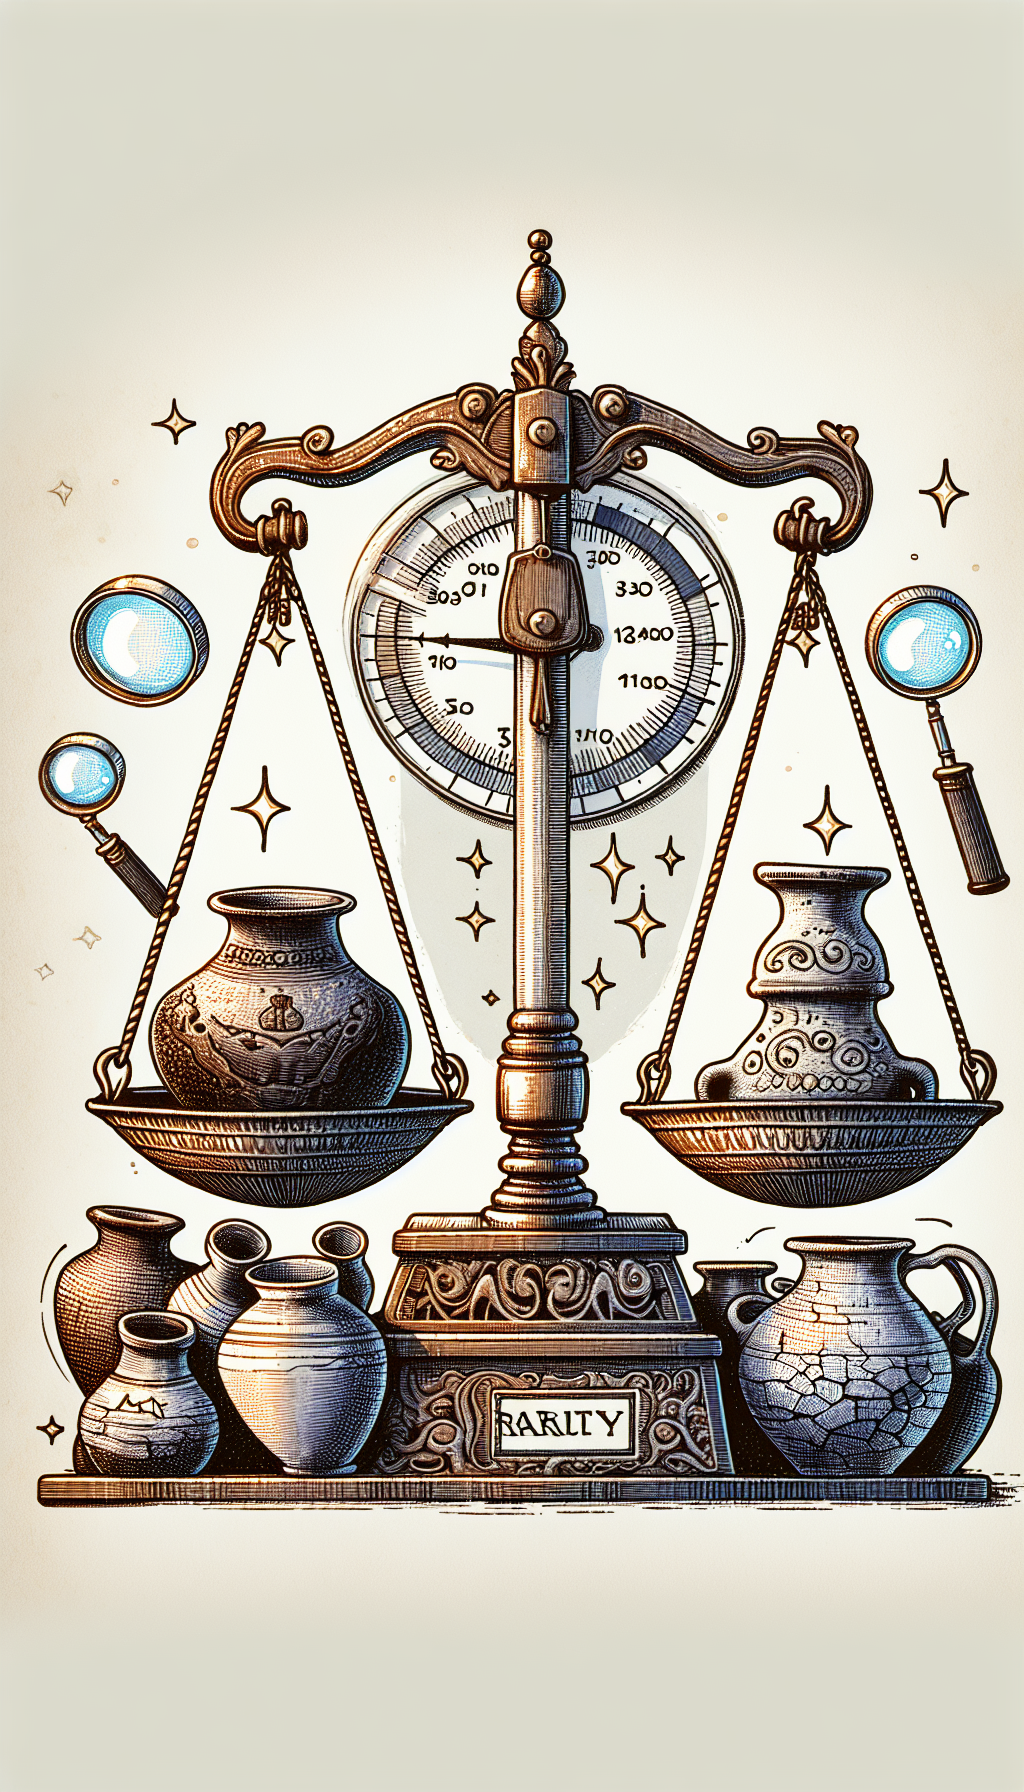 An antique 'value-o-meter' scales balance delicately, with pristine, rare crocks on one side and common, worn jugs on the other. The meter's arrow oscillates between 'High Value' and 'Low Value', with subtle hints such as magnifying glasses scrutinizing crack patterns and rarity stars glinting on the rarer pieces. The illustration fuses line art with watercolor textures, embodying a vintage yet vivid aesthetic.